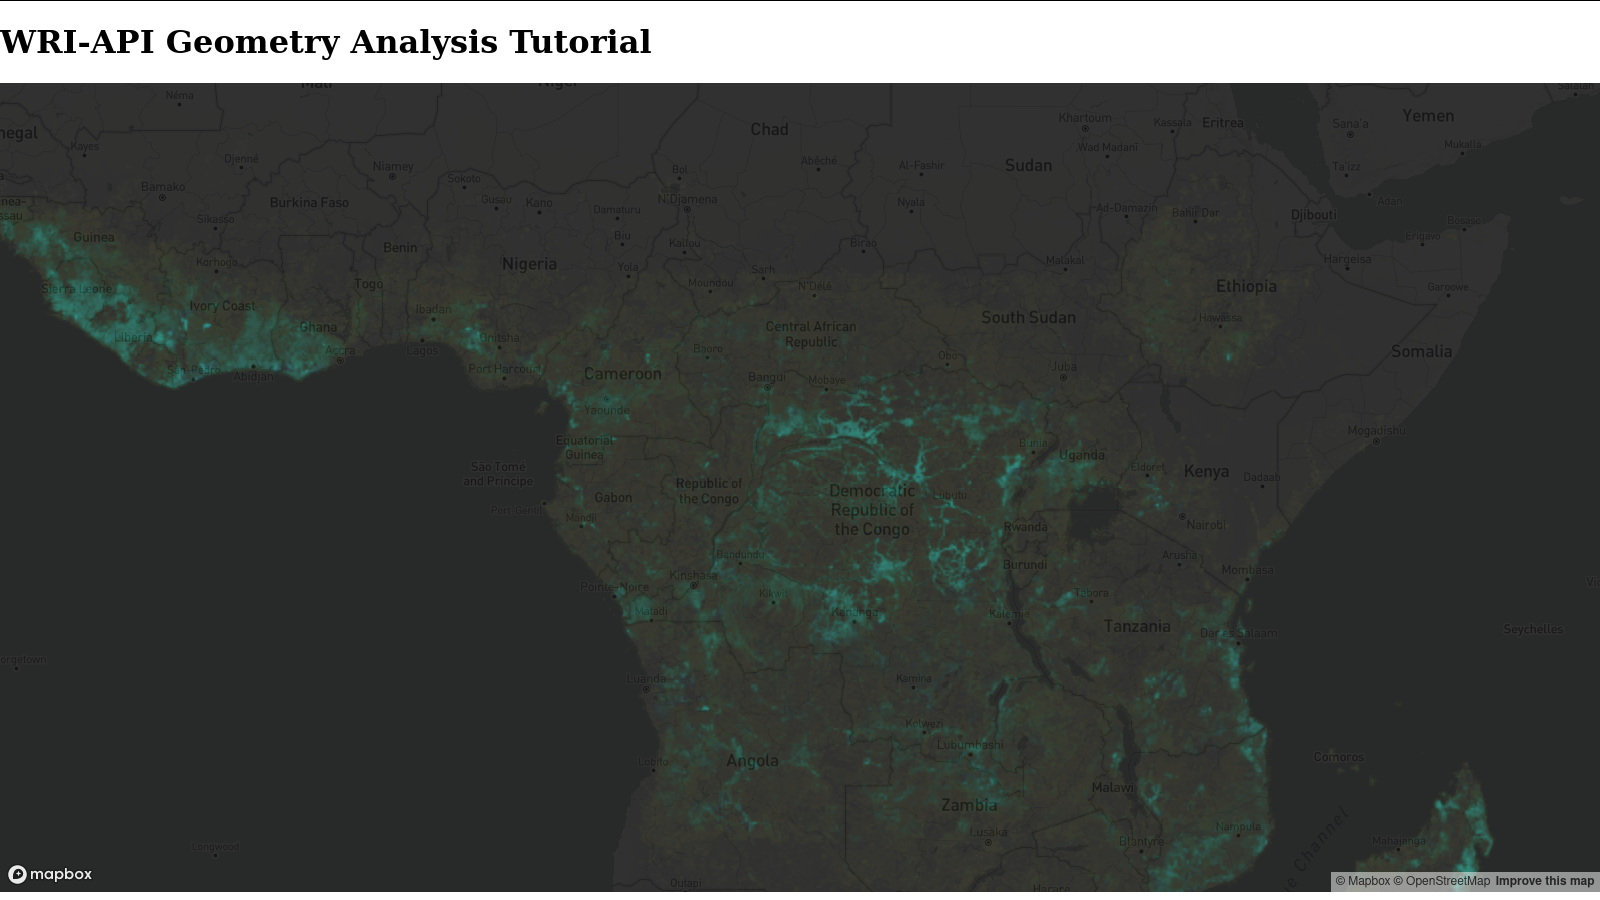 Image of basic webpage, with a title, a large map zoomed to central Africa, and a green and black map depicting tree cover loss